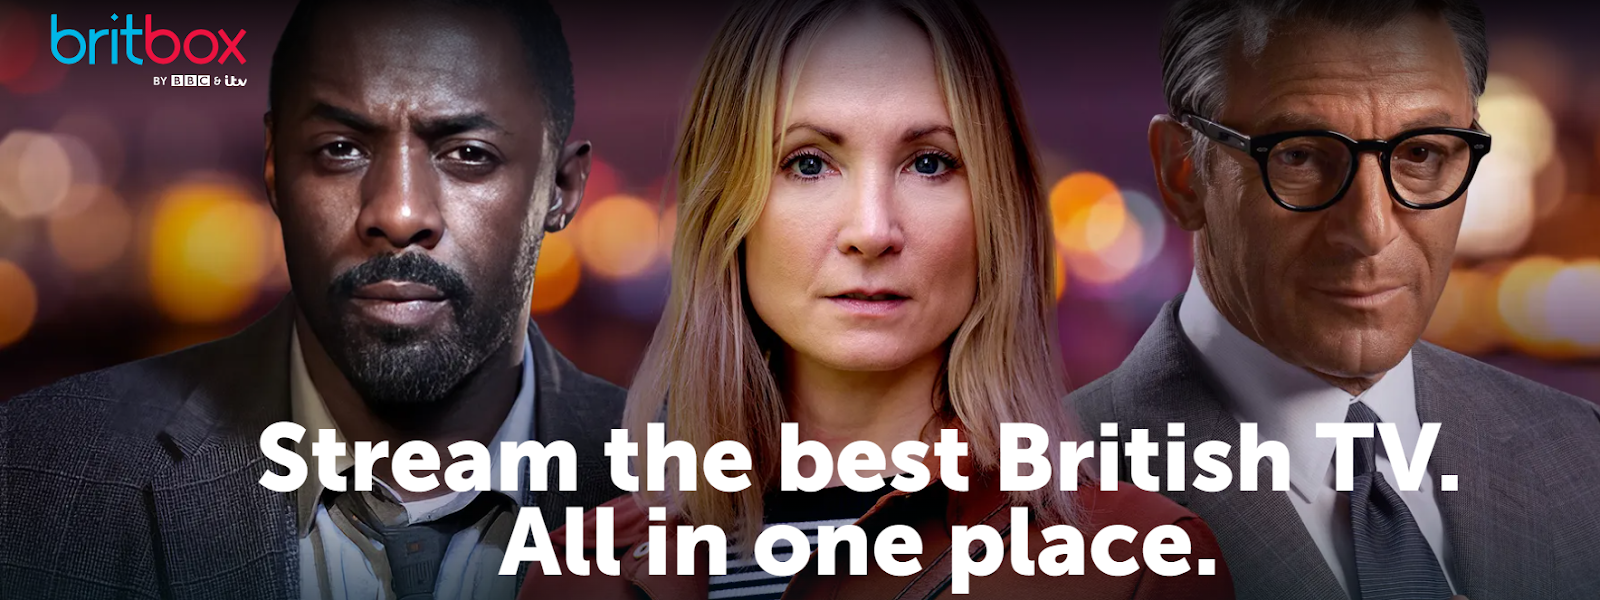 Britbox has the best British TV in one place